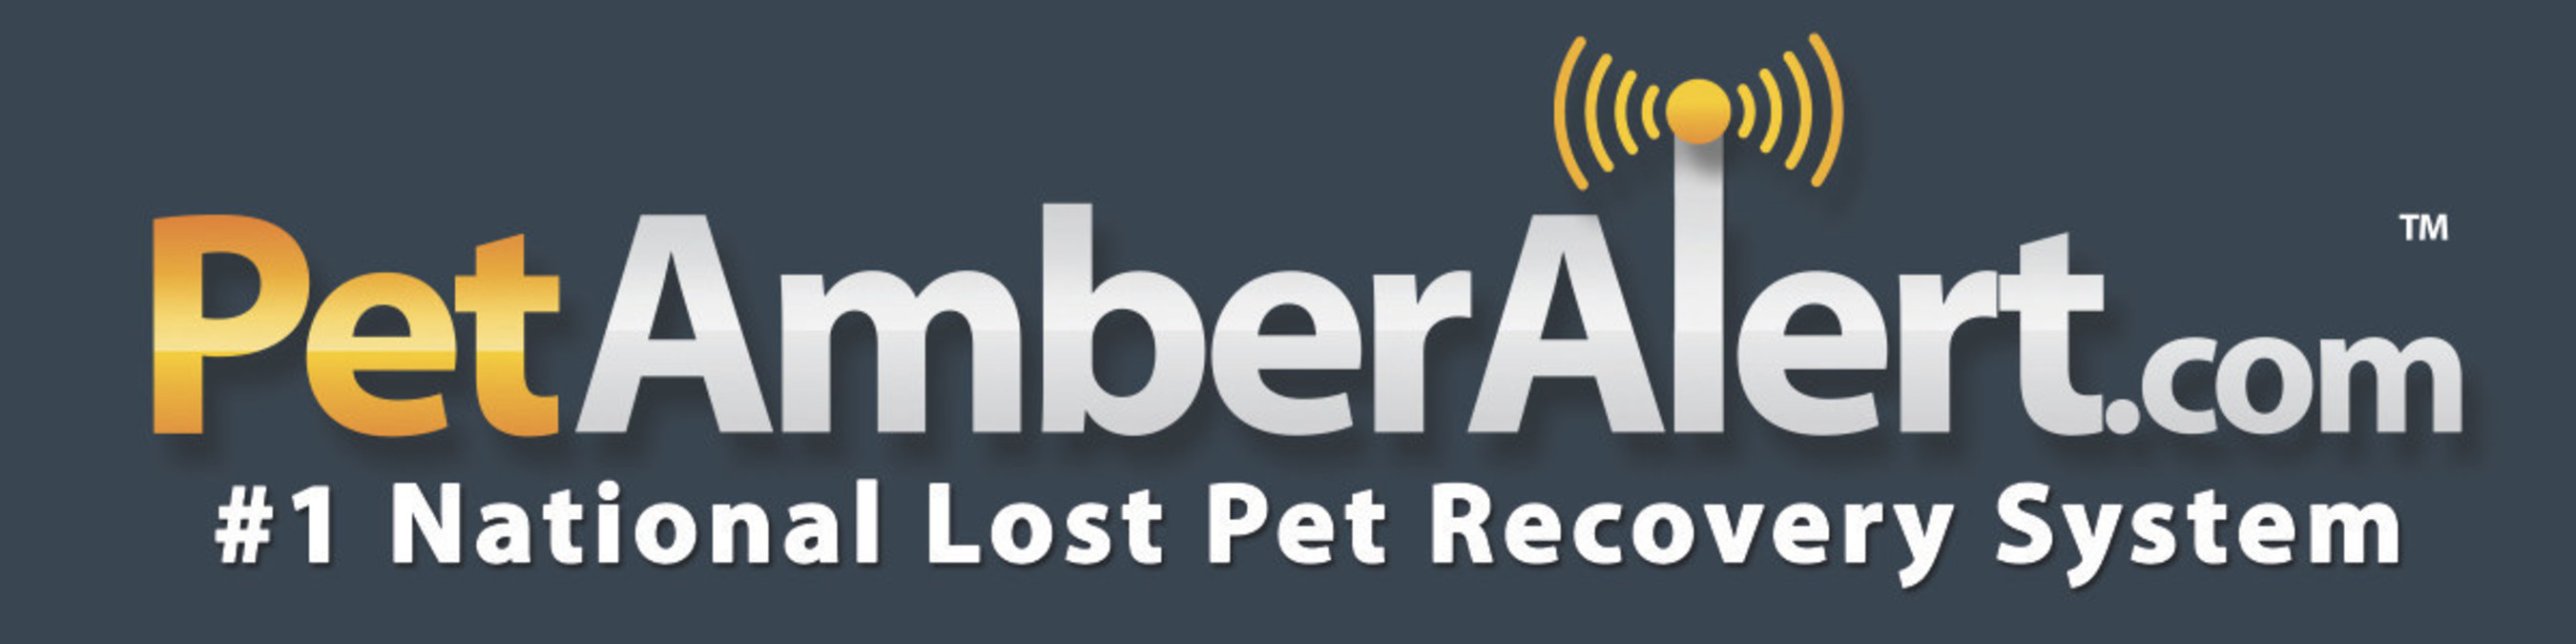 PetAmberAlert.com is the #1 lost pet recovery service in the world